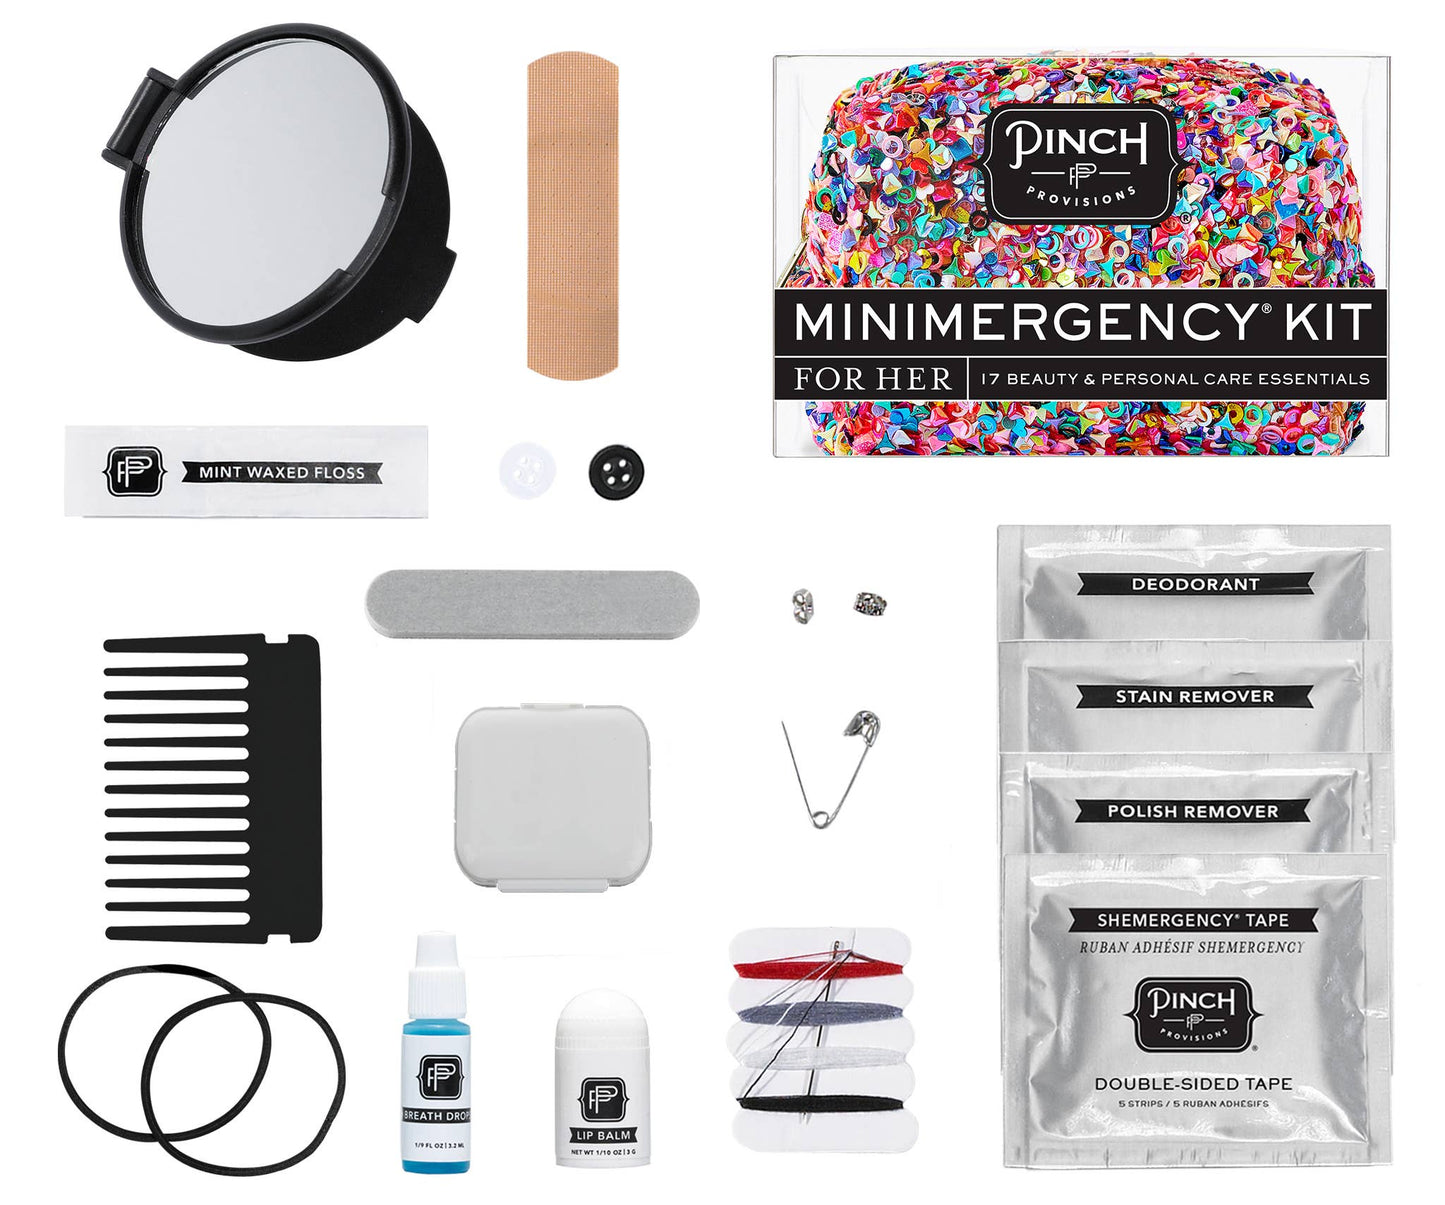 PINCH Provisions - Big Glitter Energy Minimergency Kit  Pinch Provisions   -better made easy-eco-friendly-sustainable-gifting